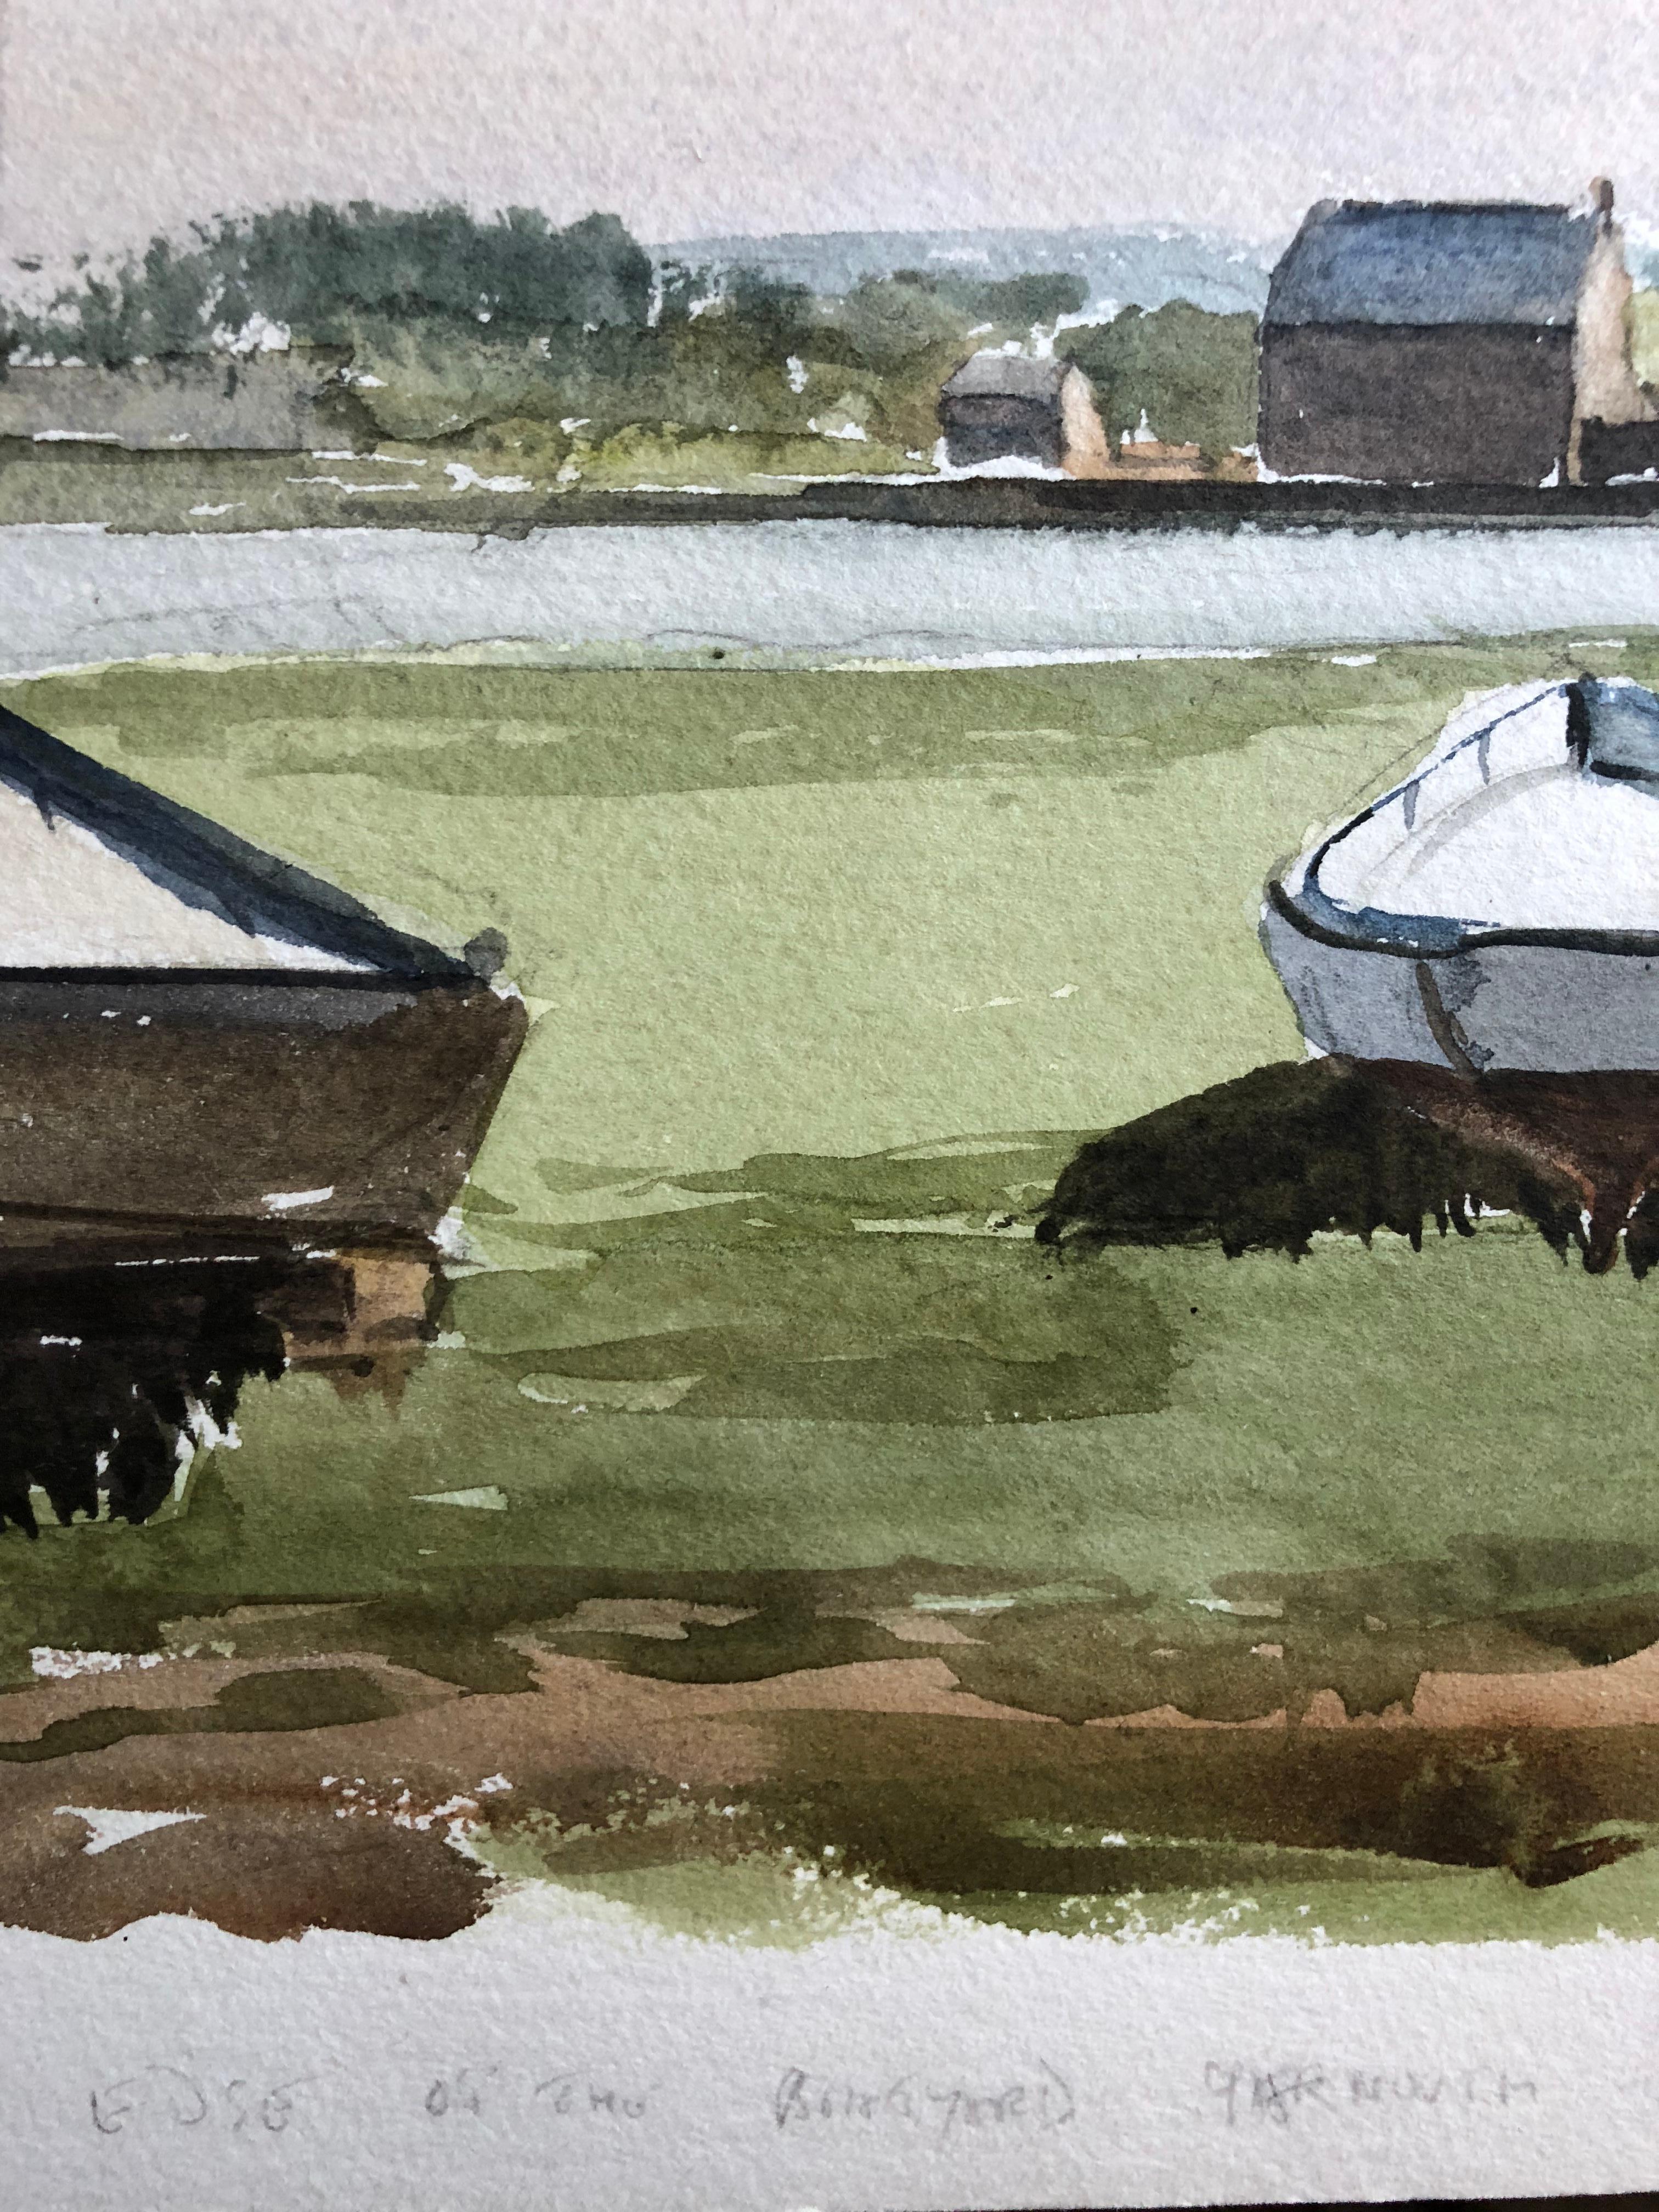 Edge of the boatyard, Yarmouth
by Ronald Birch, British circa 1970's
watercolour on art paper, unframed
overall paper measures: 15 x 22 inches
titled and signed to lower right

*FREE SHIPPING ON THIS PAINTING*: AMERICAN, EUROPE & UNITED